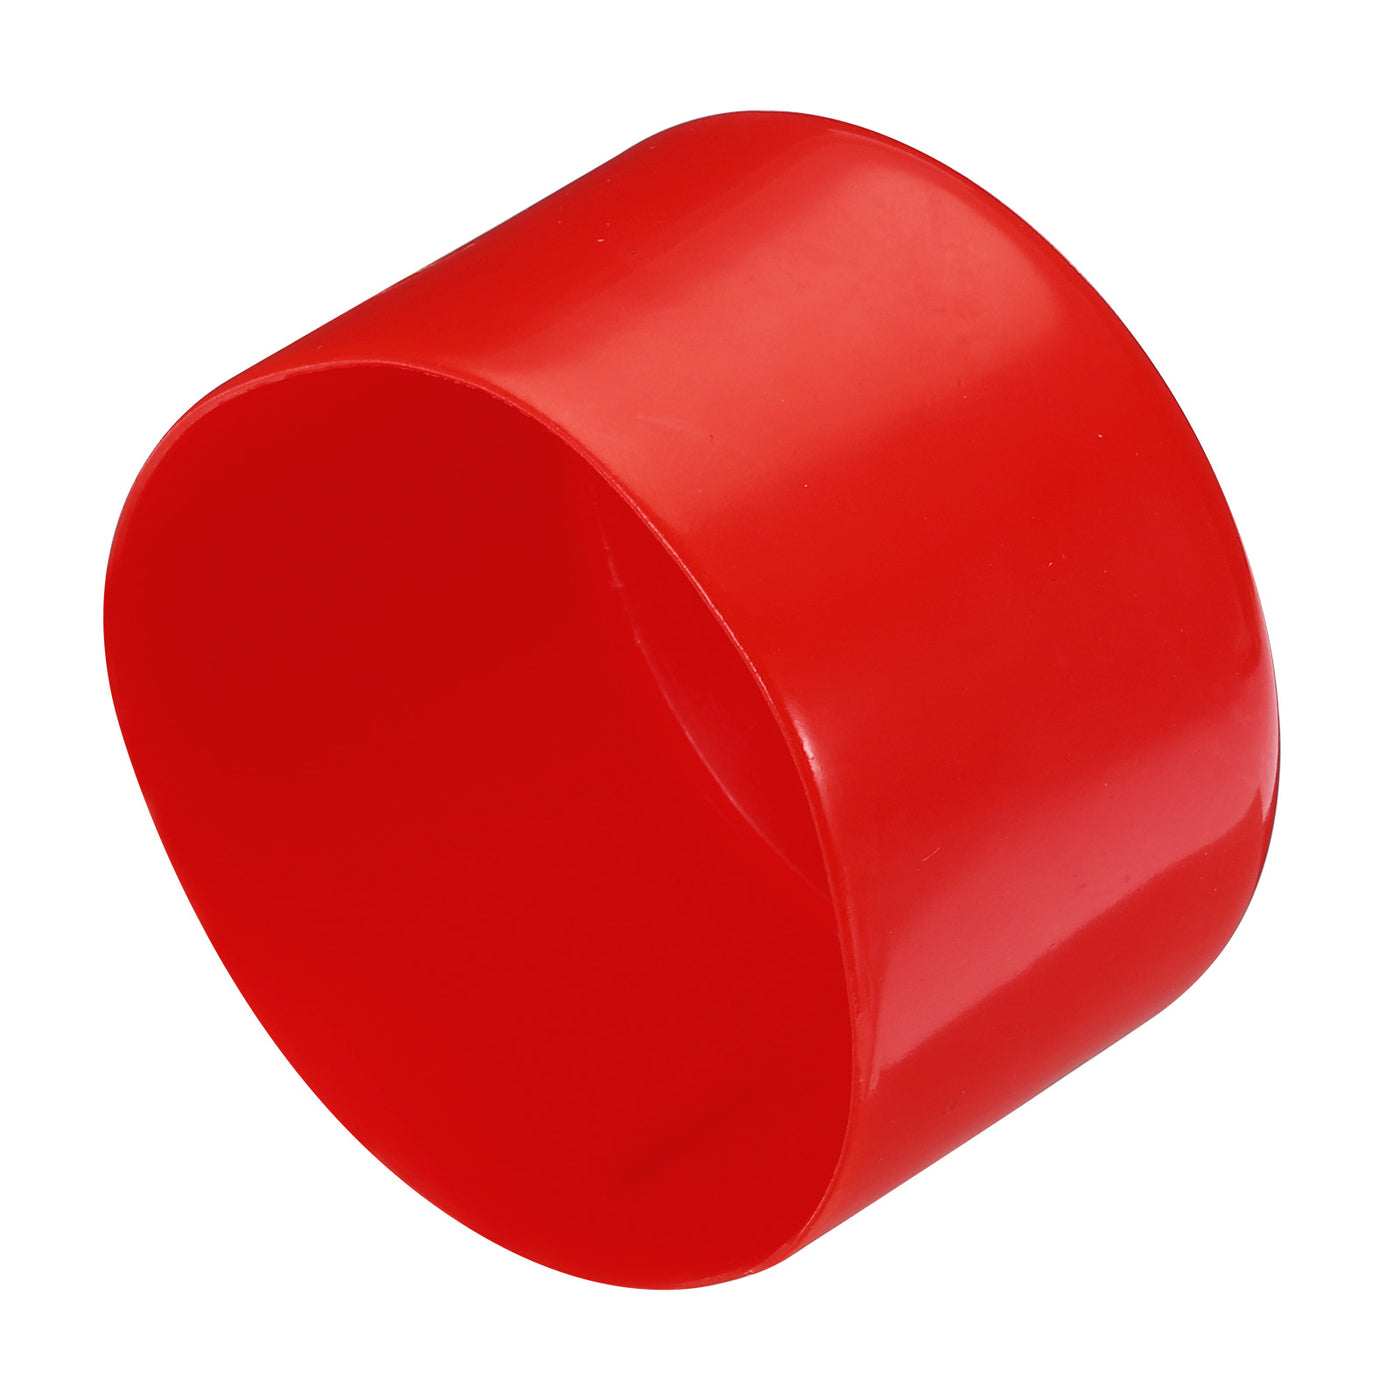 uxcell Uxcell 2pcs Rubber End Caps 95mm ID Vinyl Round Tube Bolt Cap Cover Screw Thread Protectors Red